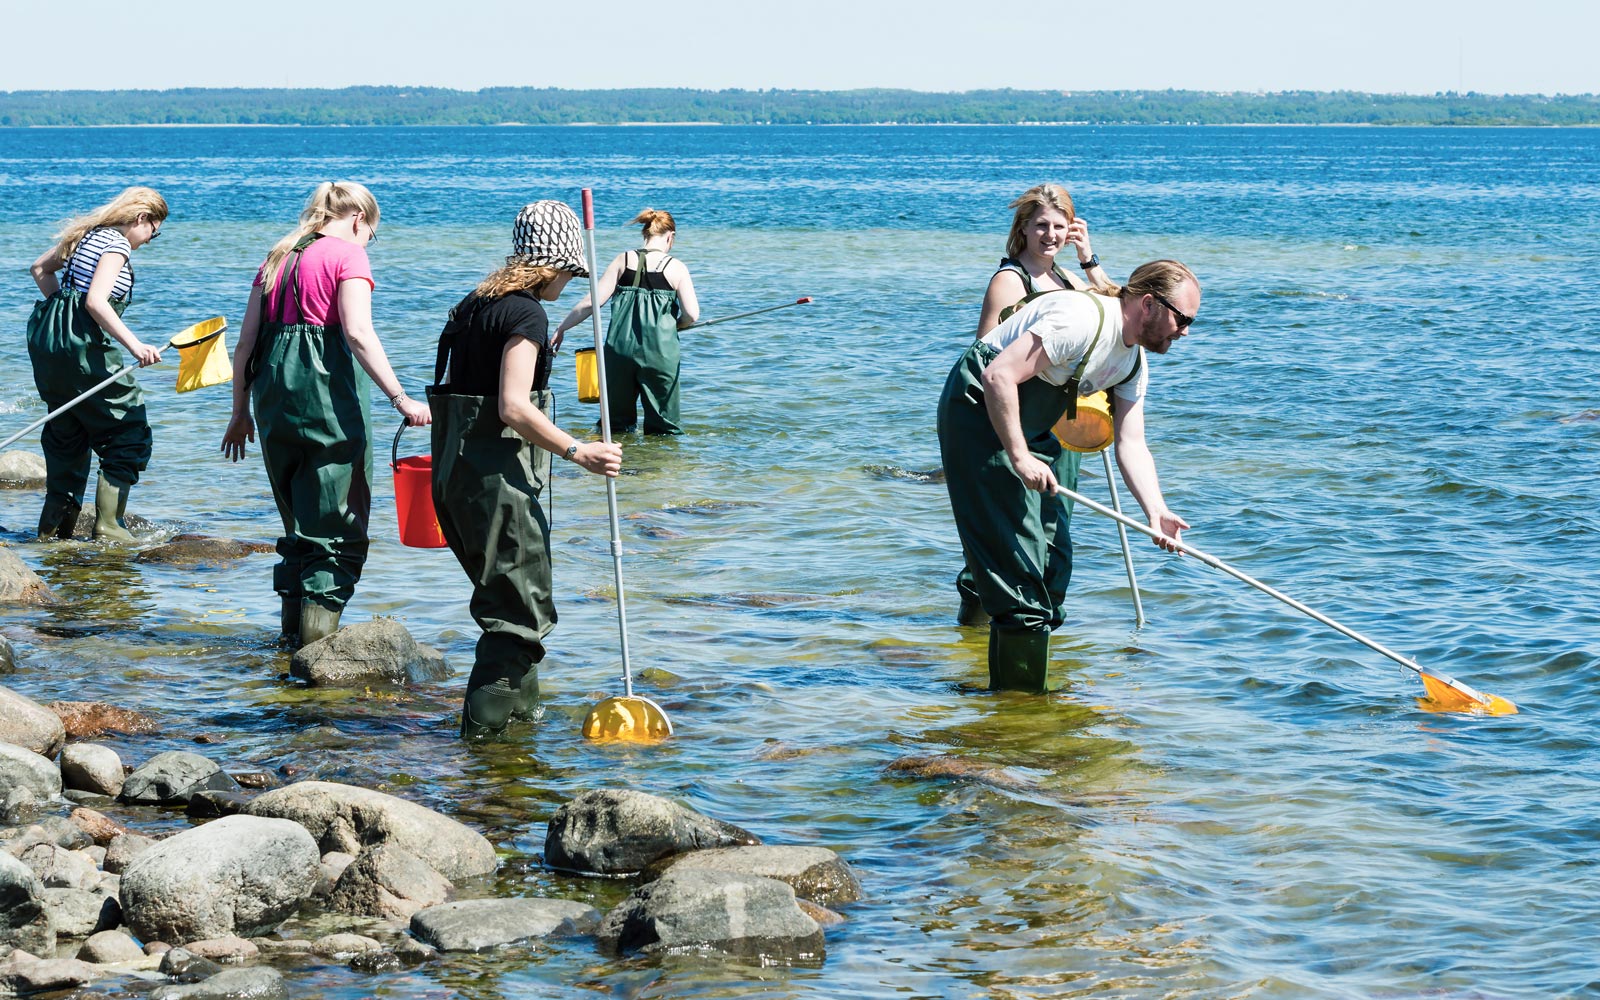 Small group wading in and examining shallow coastal water with ring nets